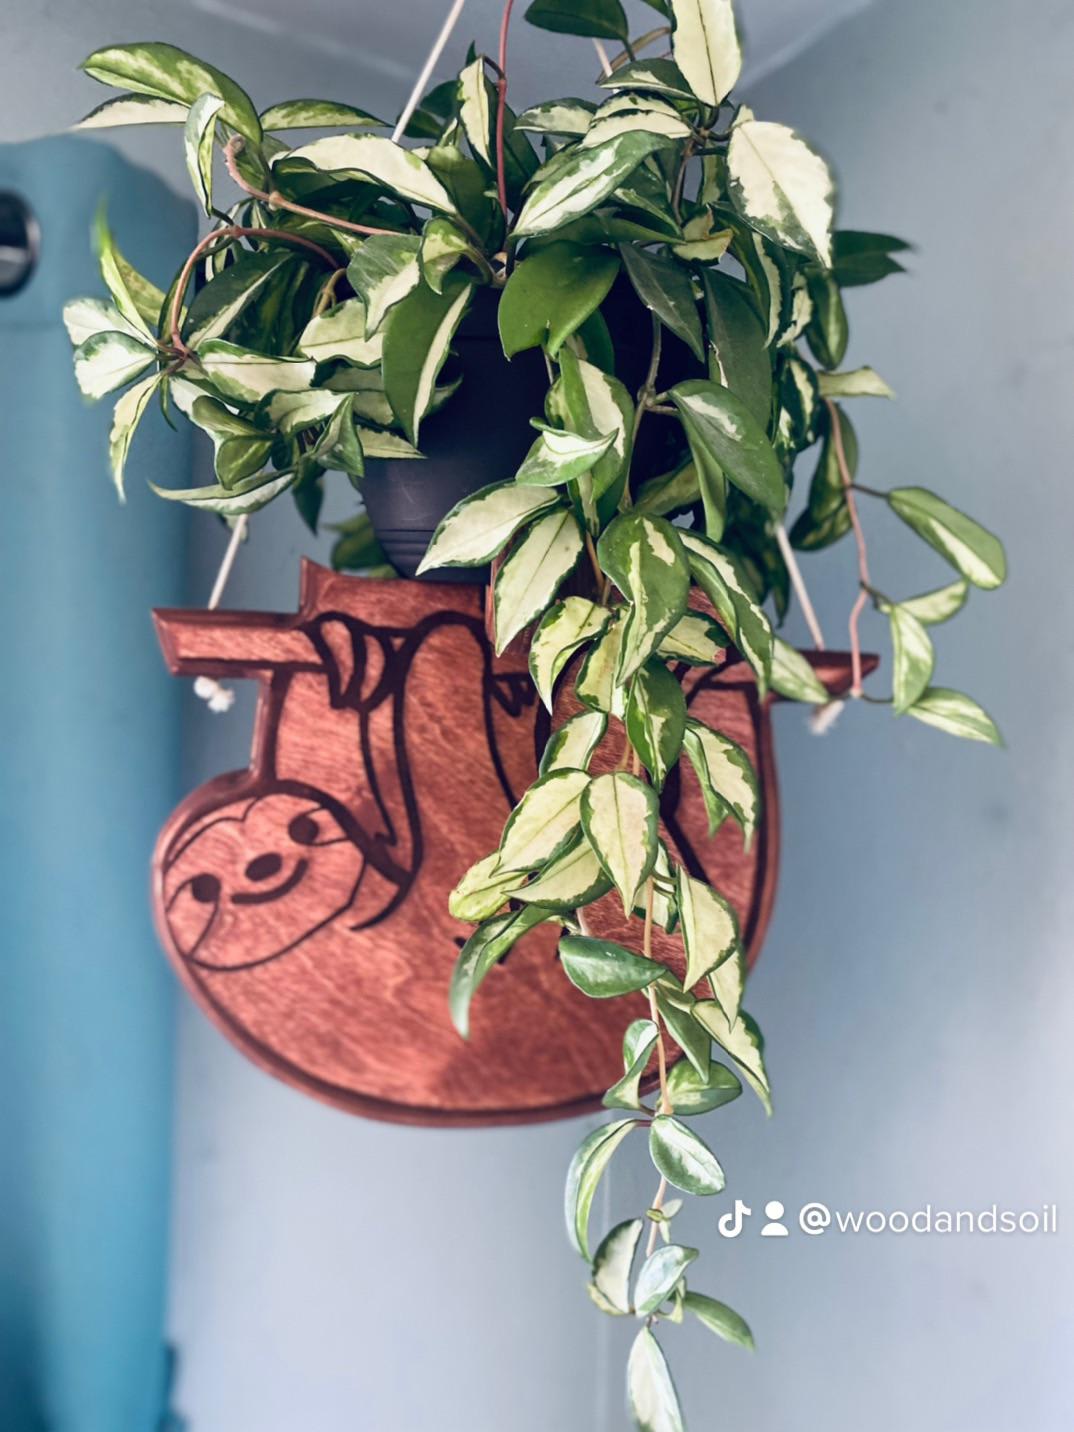 A sloth in your house plants makes total sense